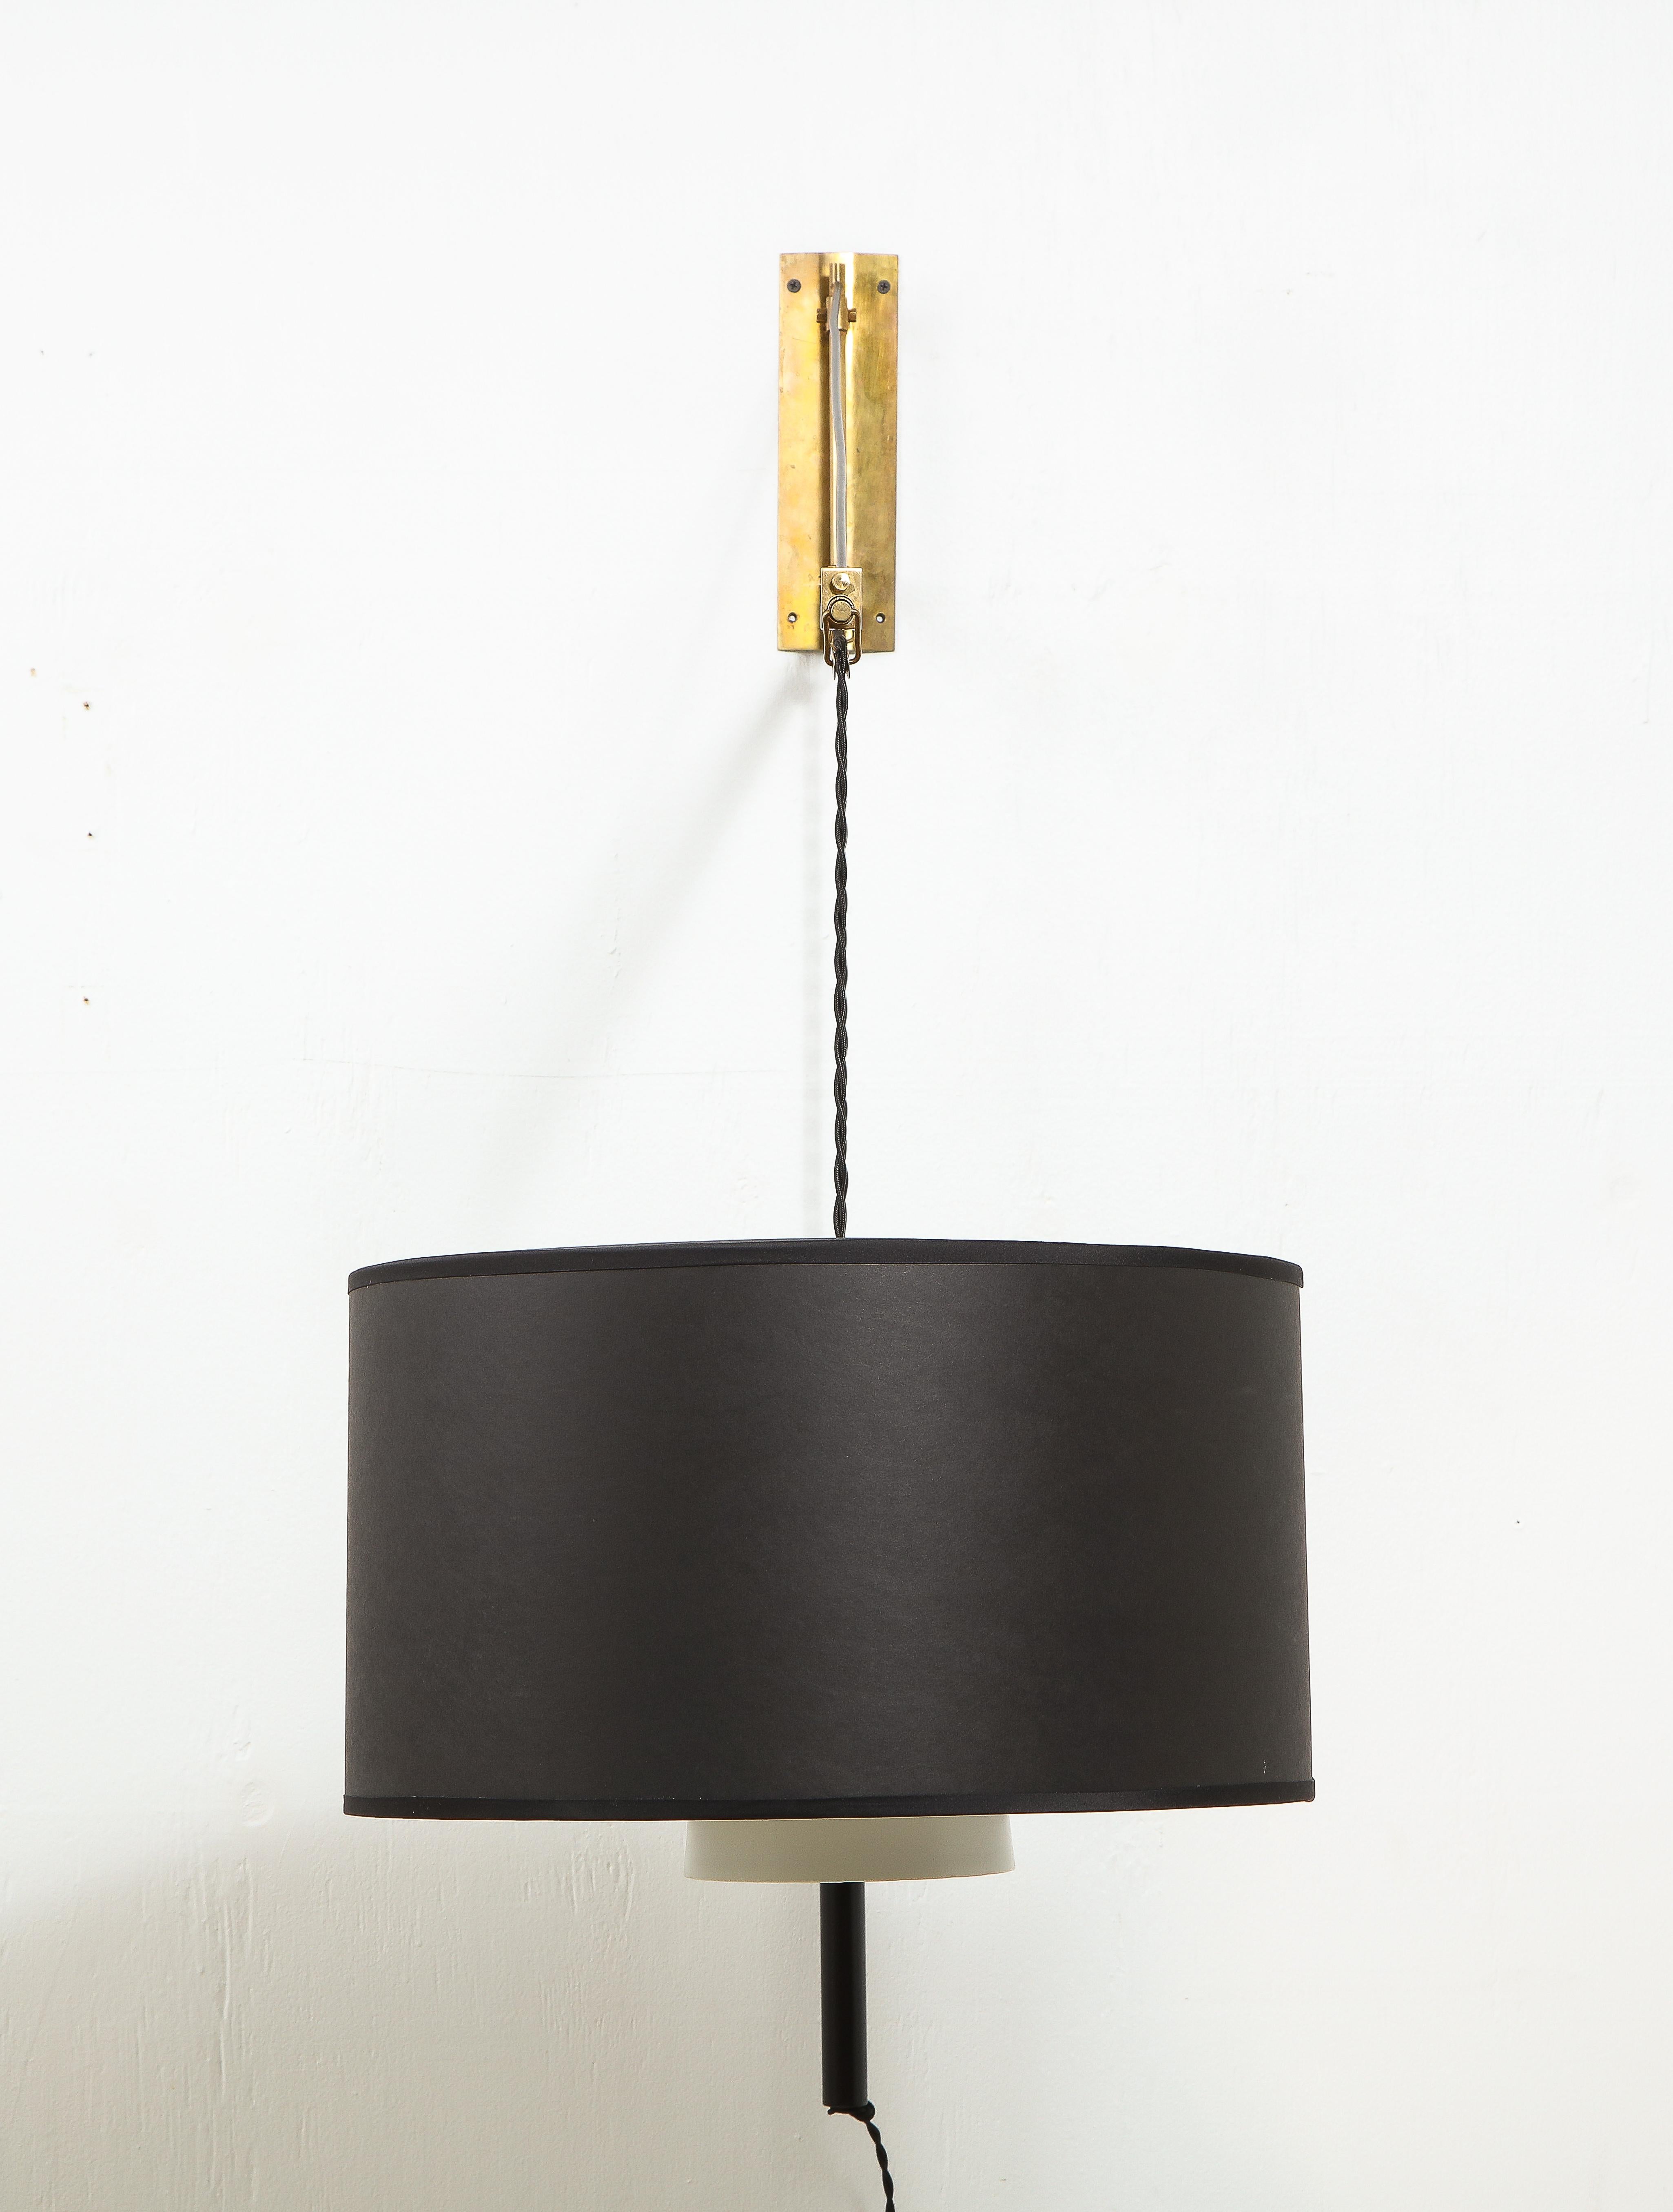 Aluminum Large Articulating Stilnovo Wall Sconce in Brass, Italy 1960's For Sale